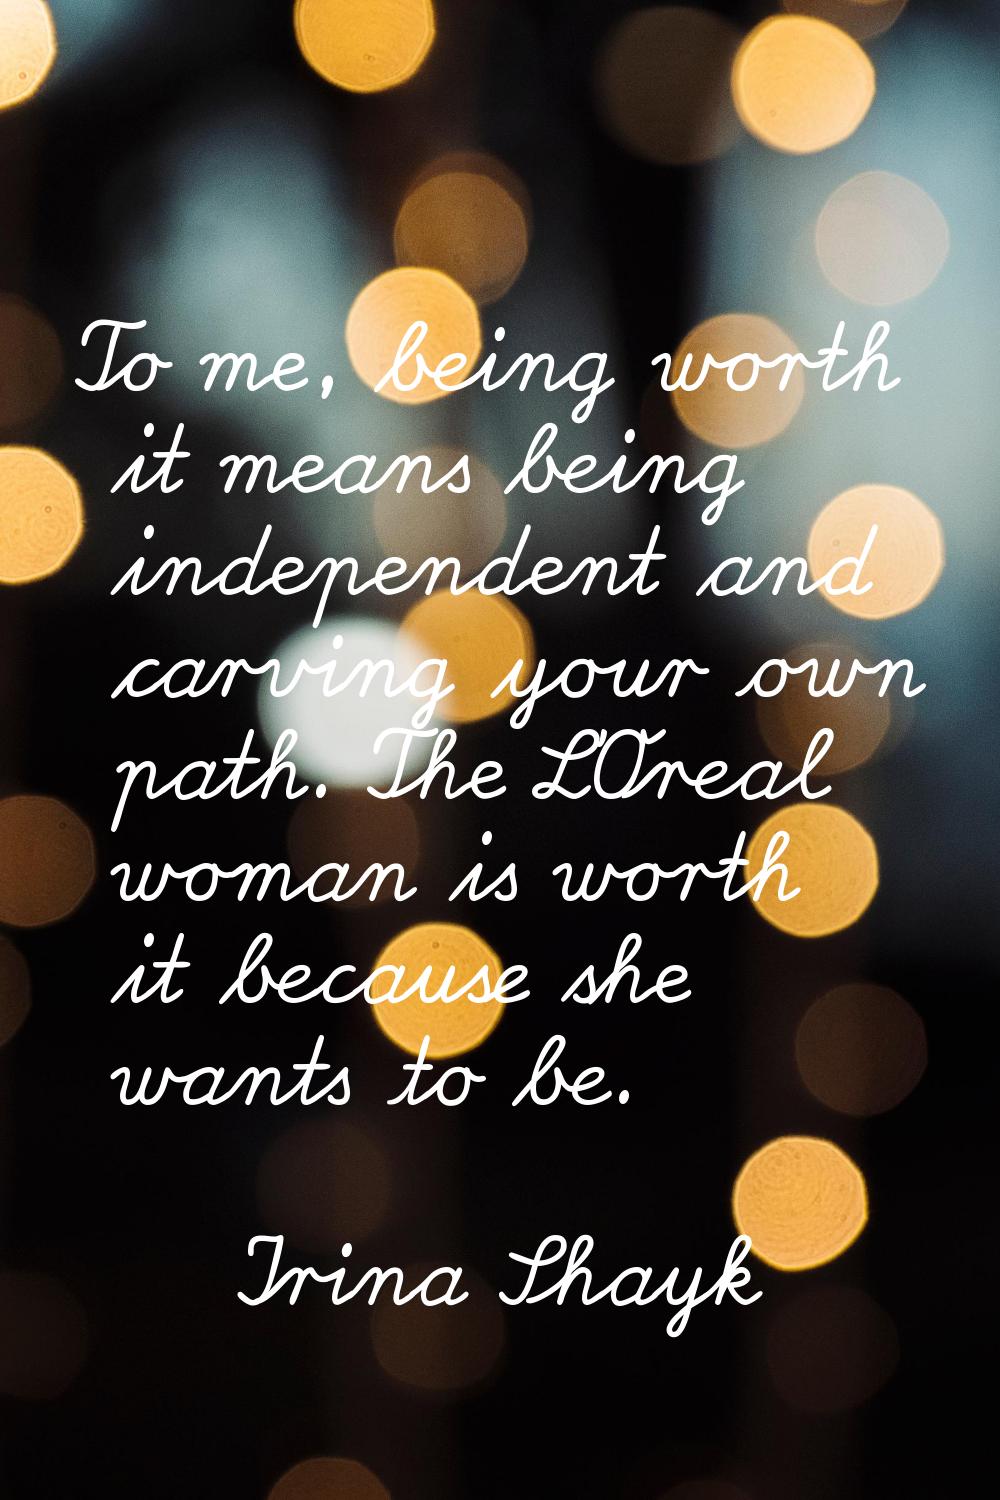 To me, being worth it means being independent and carving your own path. The L'Oreal woman is worth